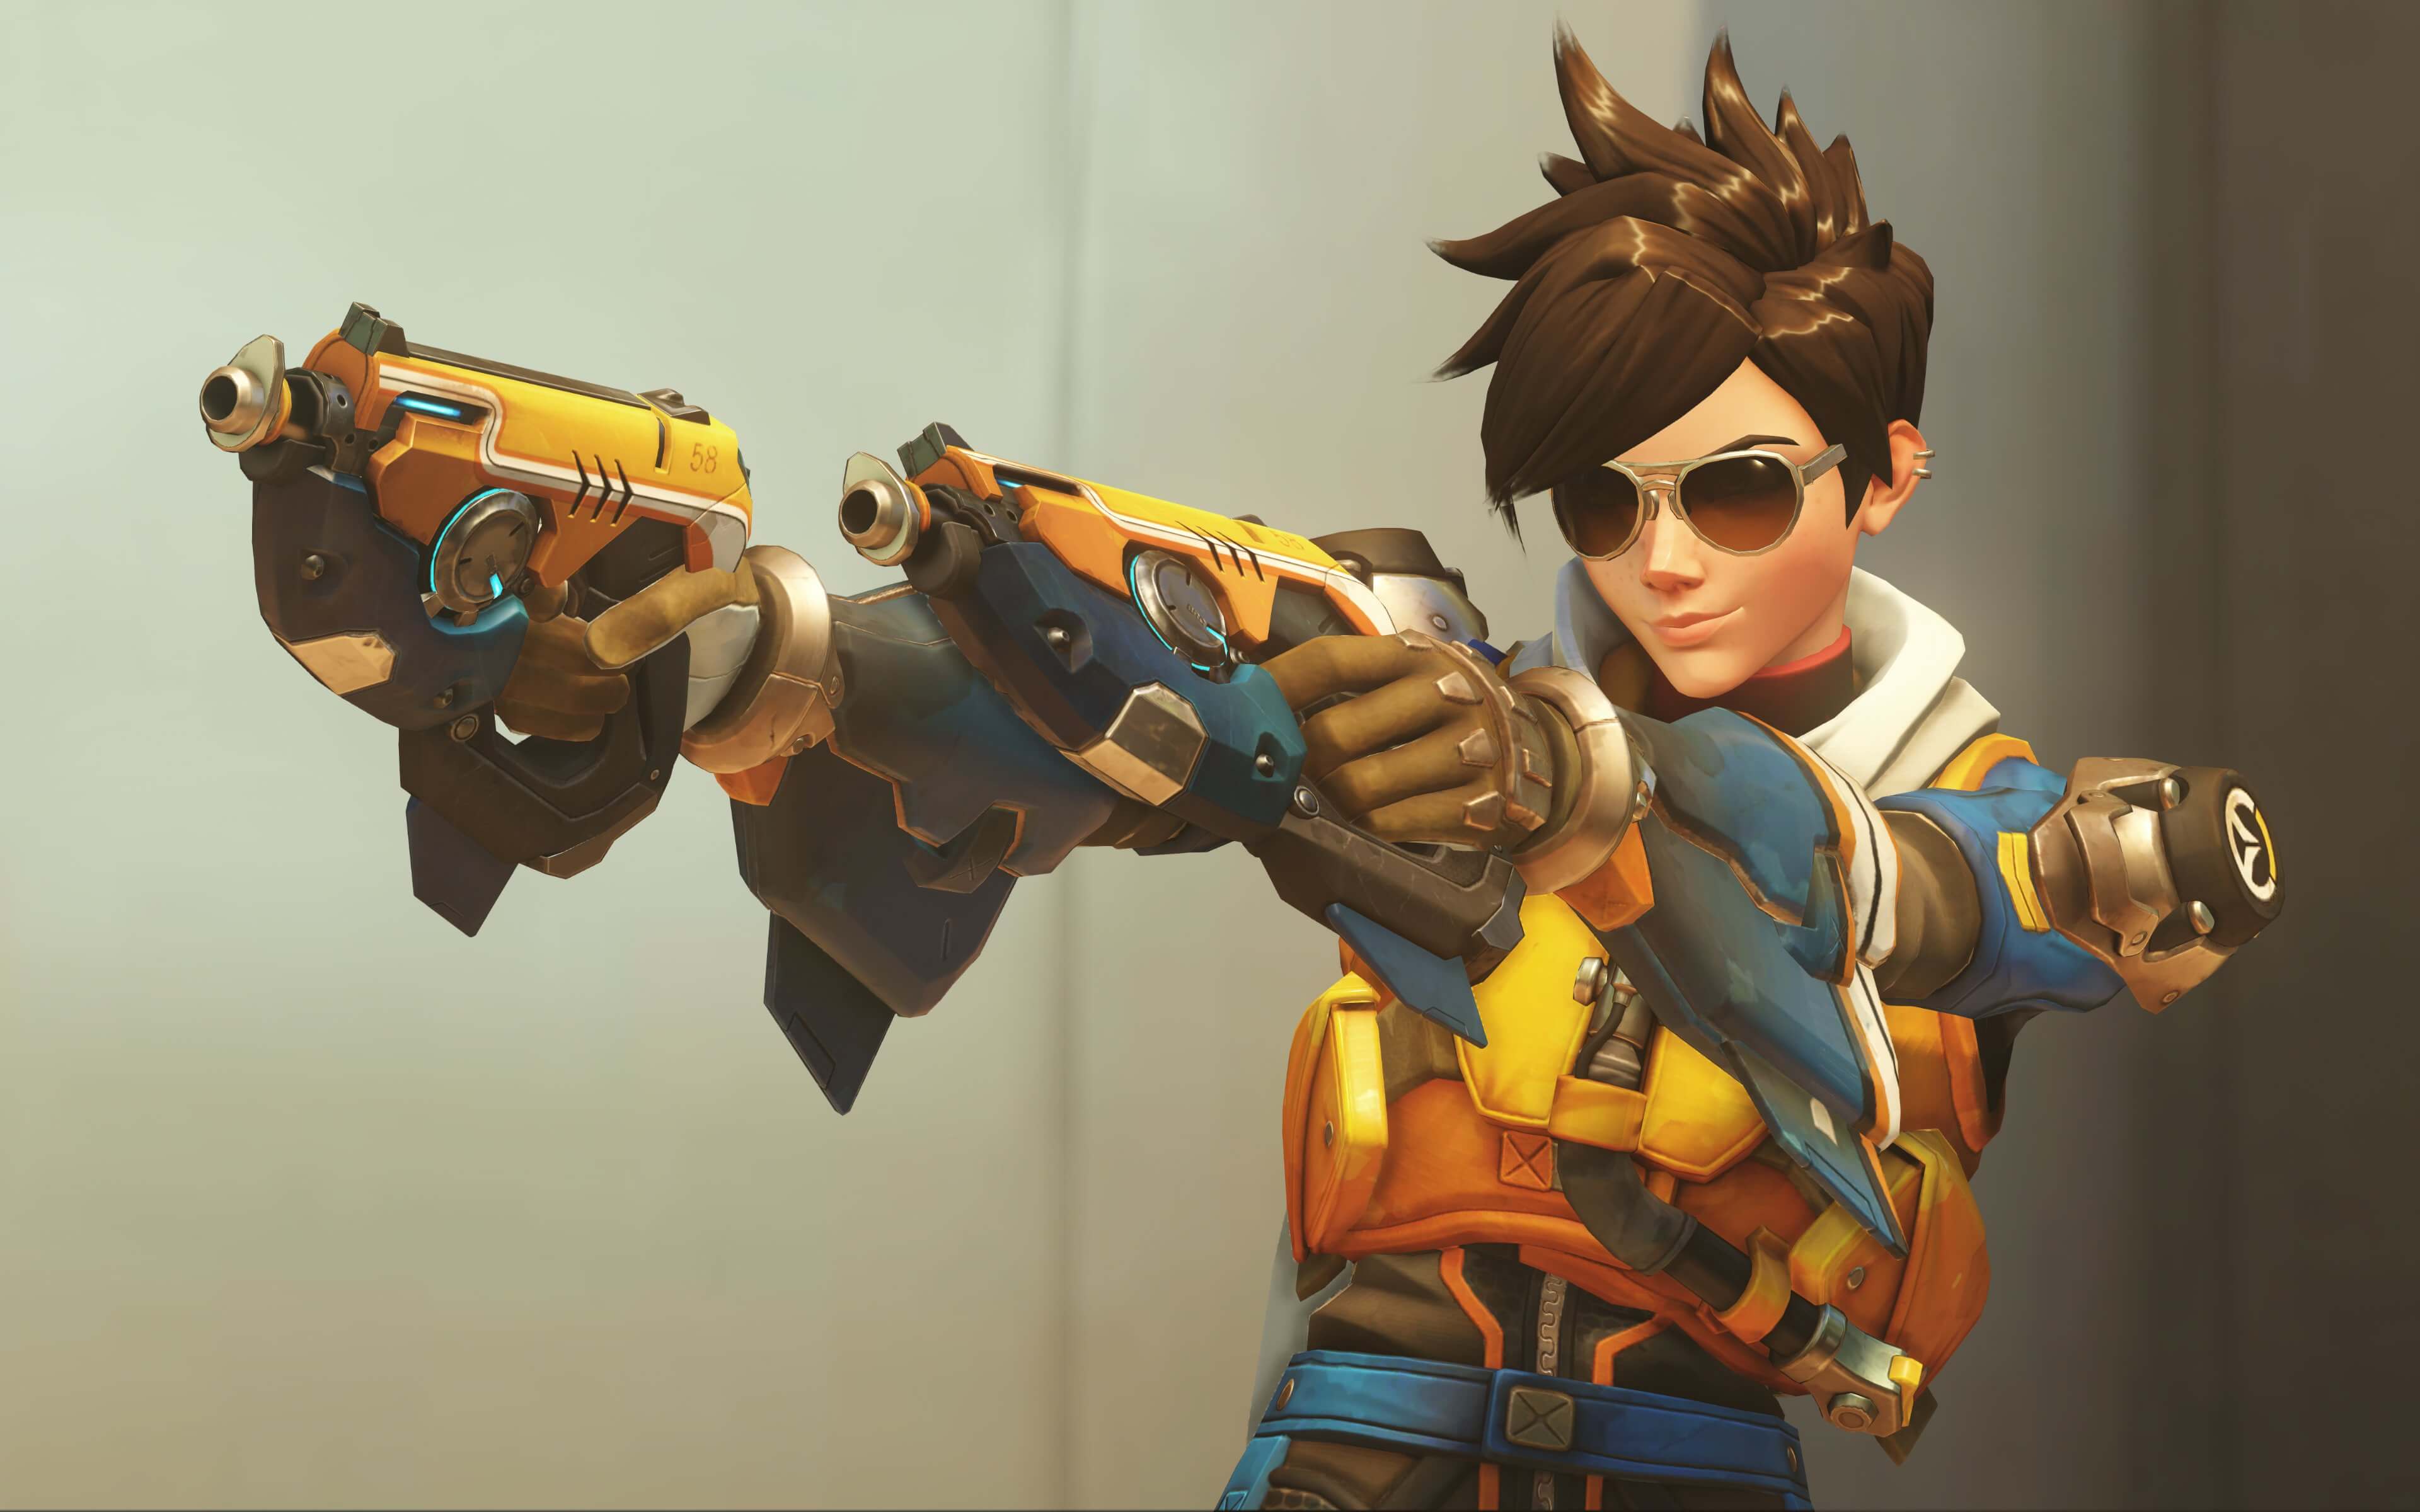 Download Tracer (Overwatch) wallpapers for mobile phone, free